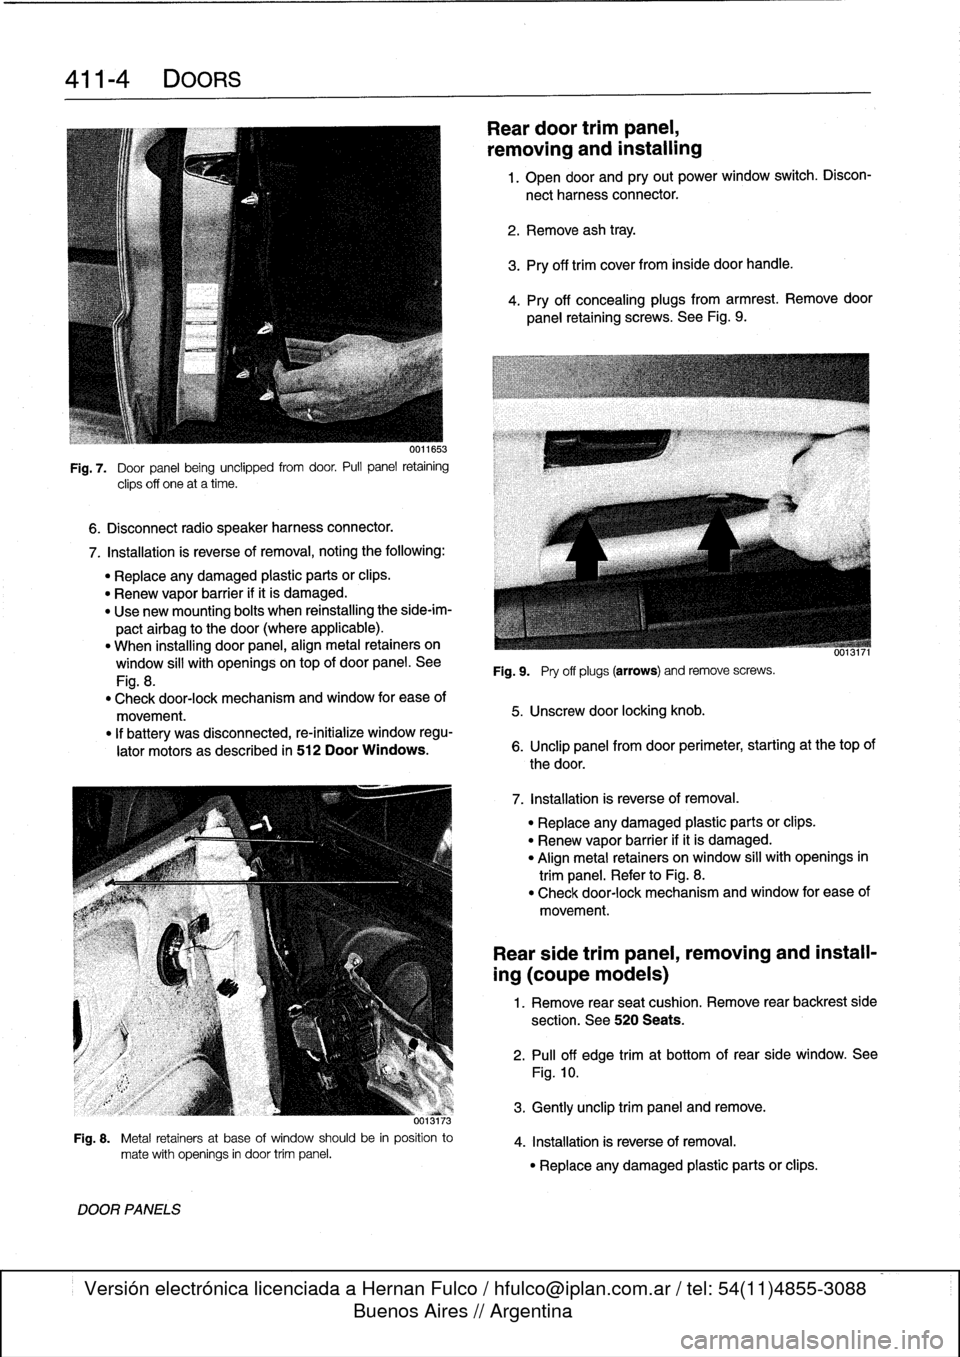 BMW 328i 1994 E36 Workshop Manual 
411-
4
DOORS

6
.
Disconnect
radio
speaker
harness
connector
.

Fig
.
7
.

	

Door
panel
being
unclipped
from
door
.
Pull
panel
retaining

clips
off
one
at
a
time
.

7
.
Installation
is
reverse
of
re